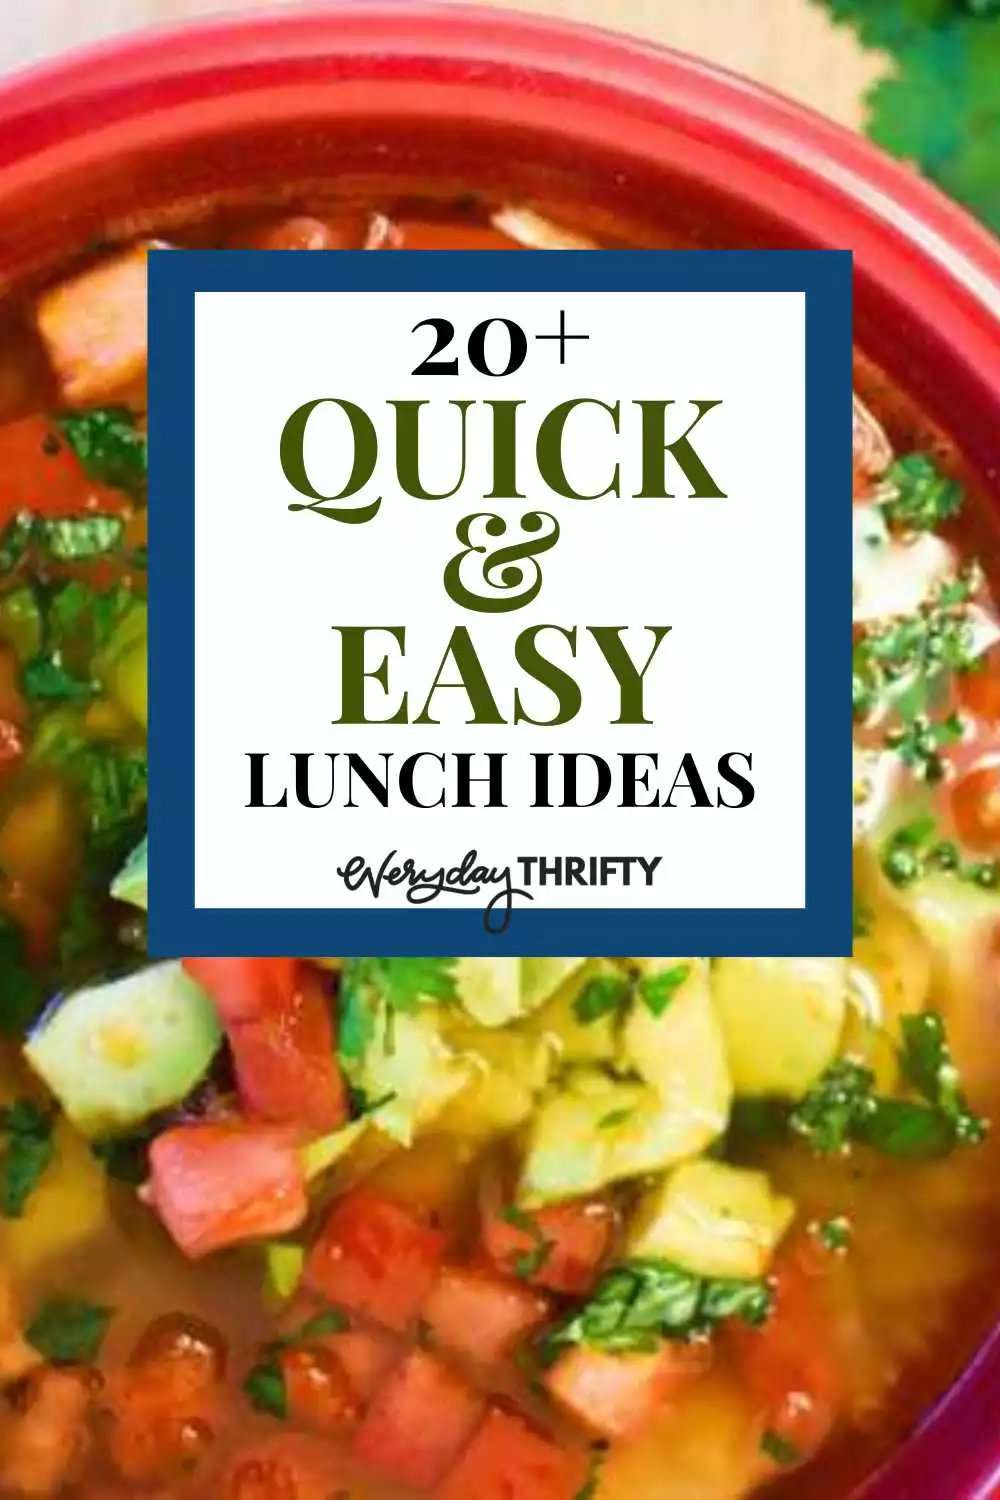 https://everydaythrifty.com/wp-content/uploads/2022/12/Quick-Easy-Lunch-Ideas-1.jpg